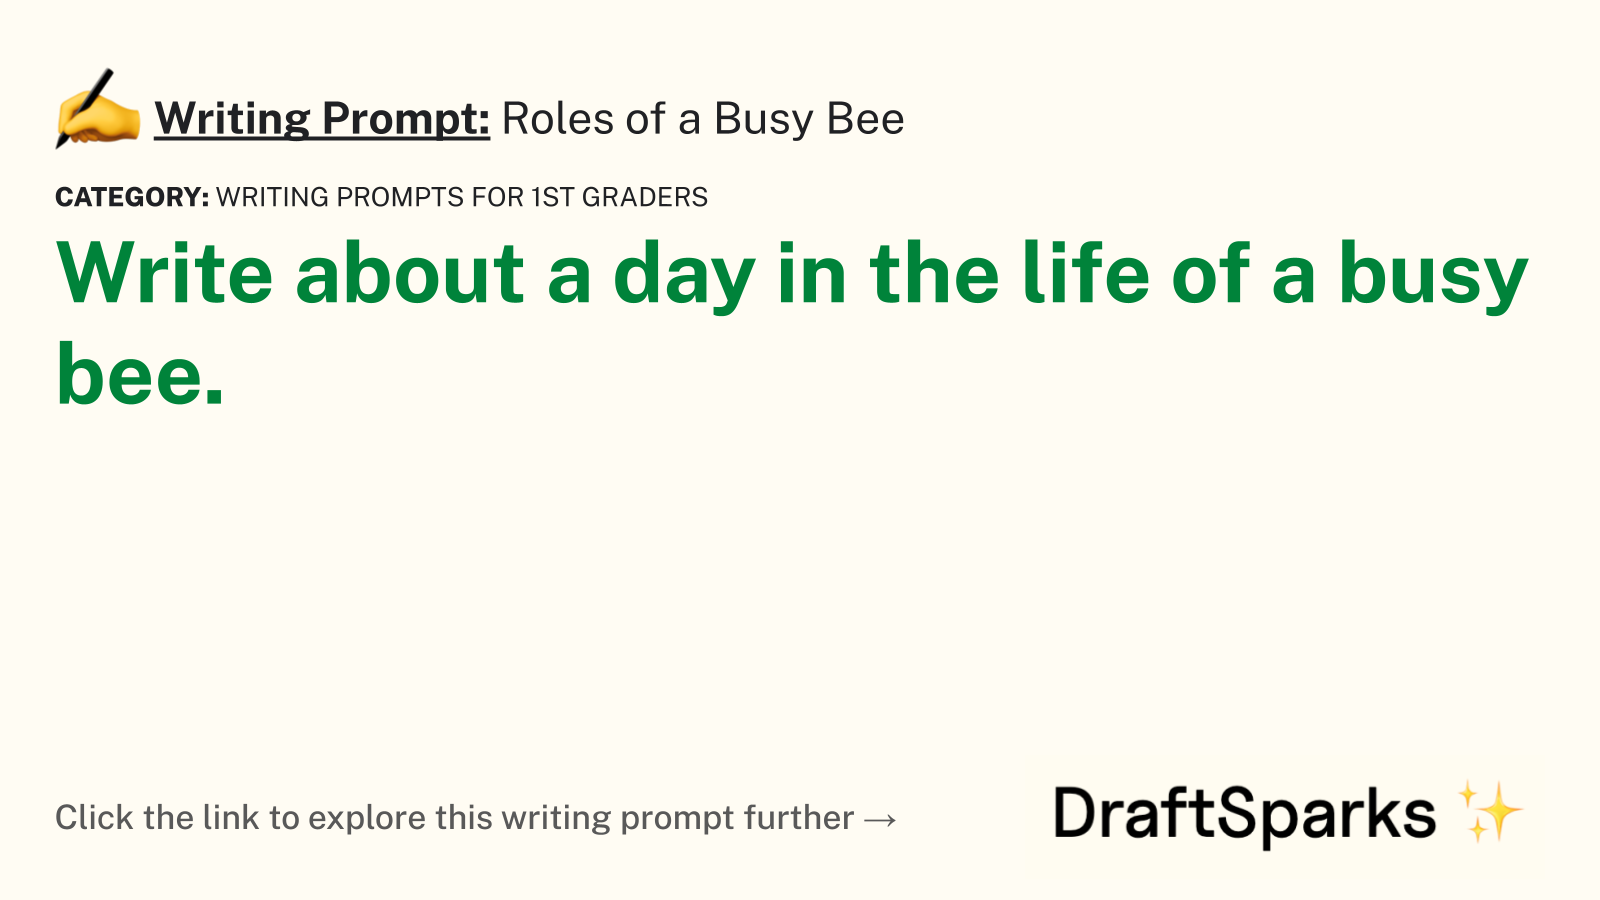 Roles of a Busy Bee